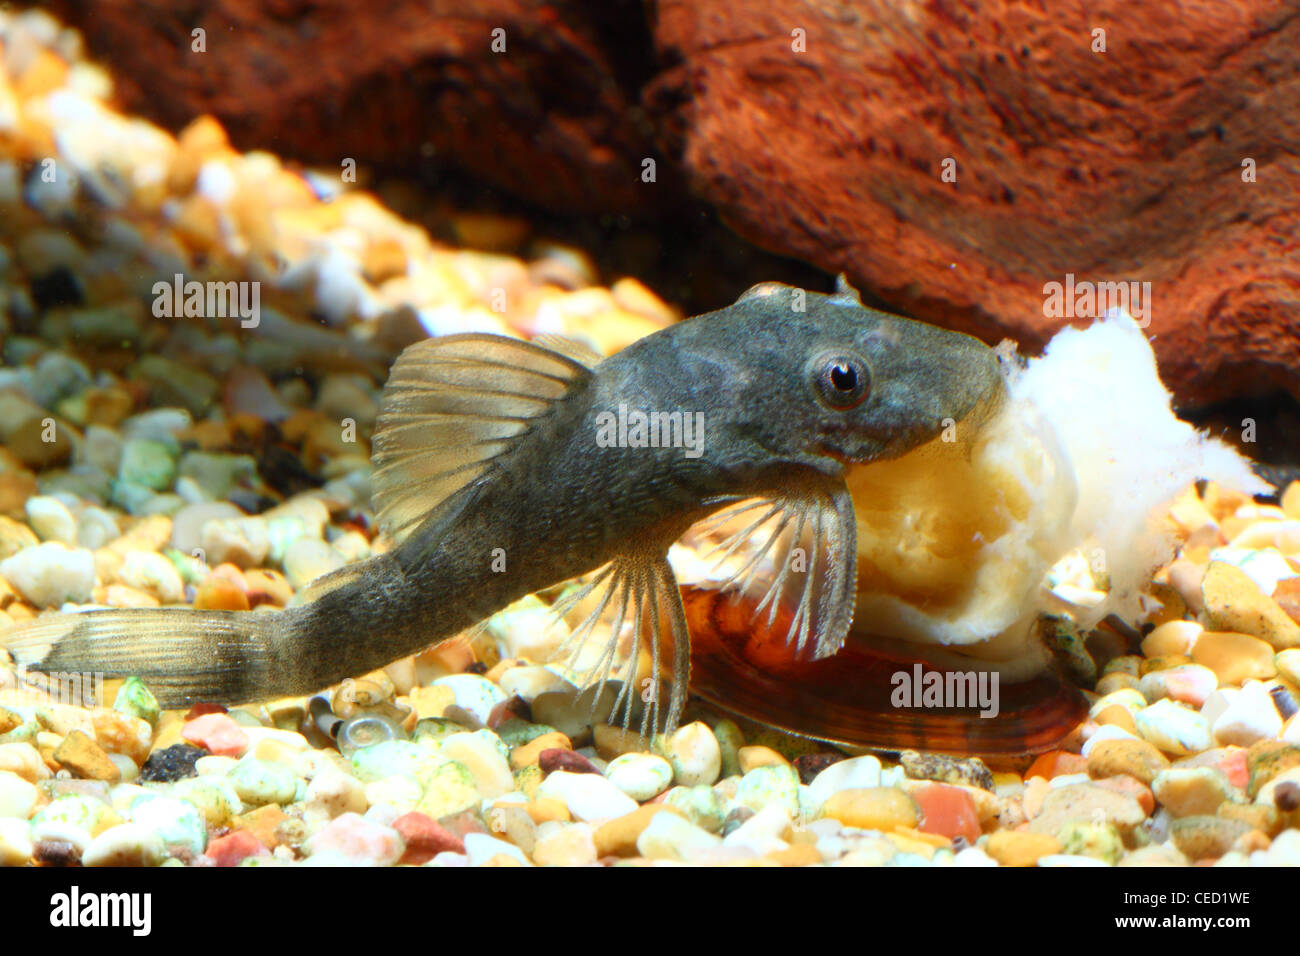 A fish (genus ancistrus) is eating a snail Stock Photo